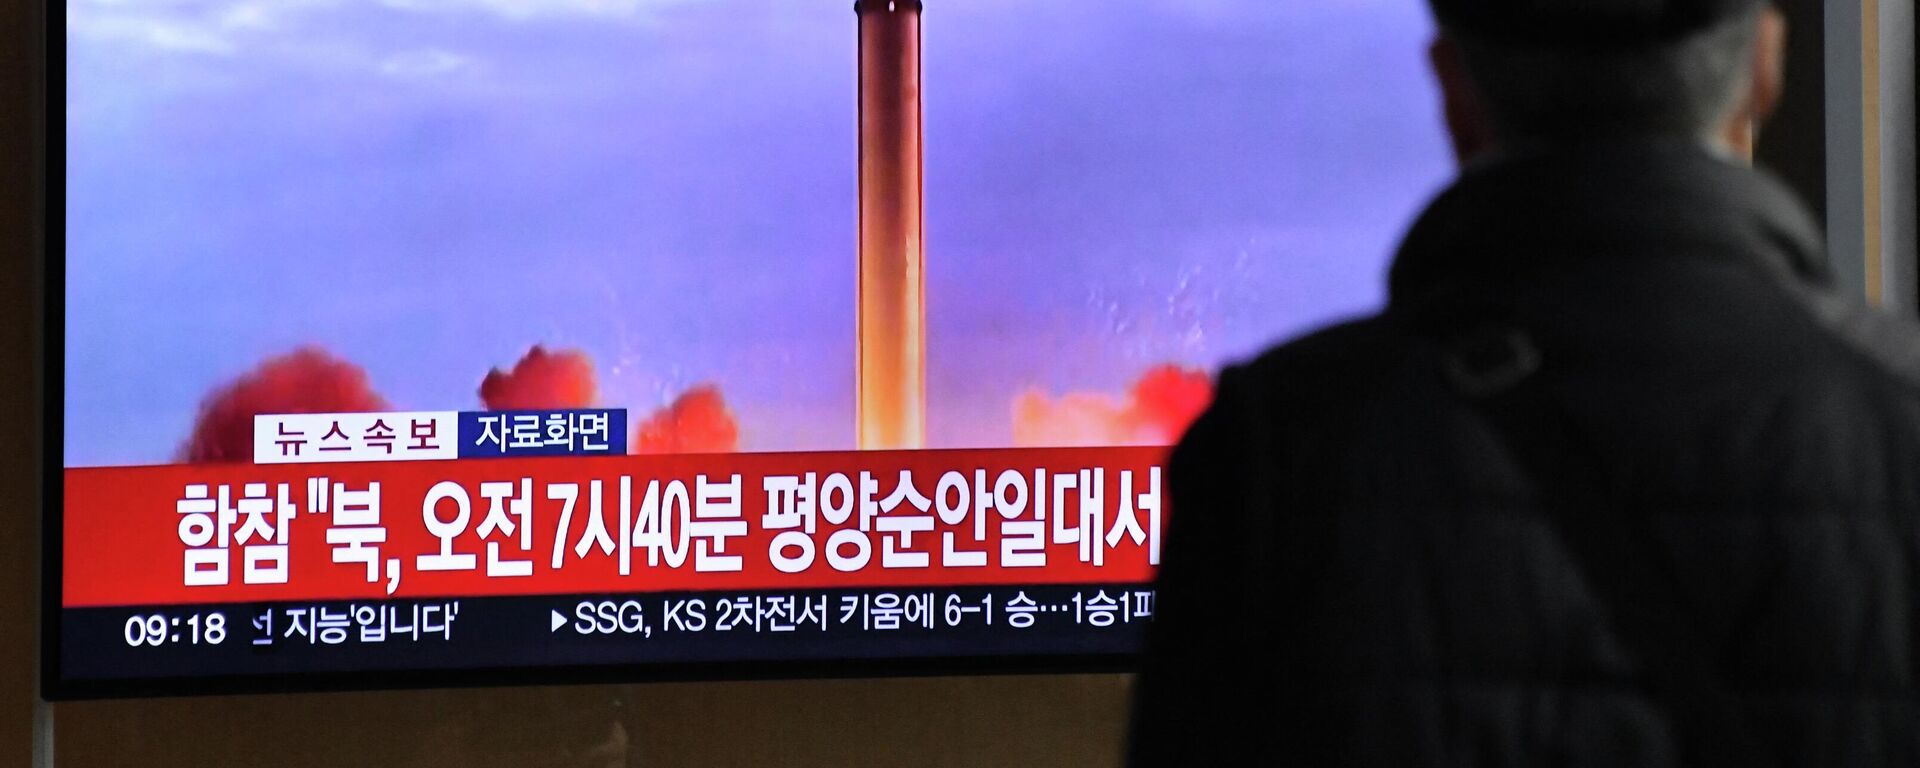 A man watches a television screen showing a news broadcast with file footage of a North Korean missile test, at a railway station in Seoul on November 3, 2022 - Sputnik International, 1920, 01.12.2022